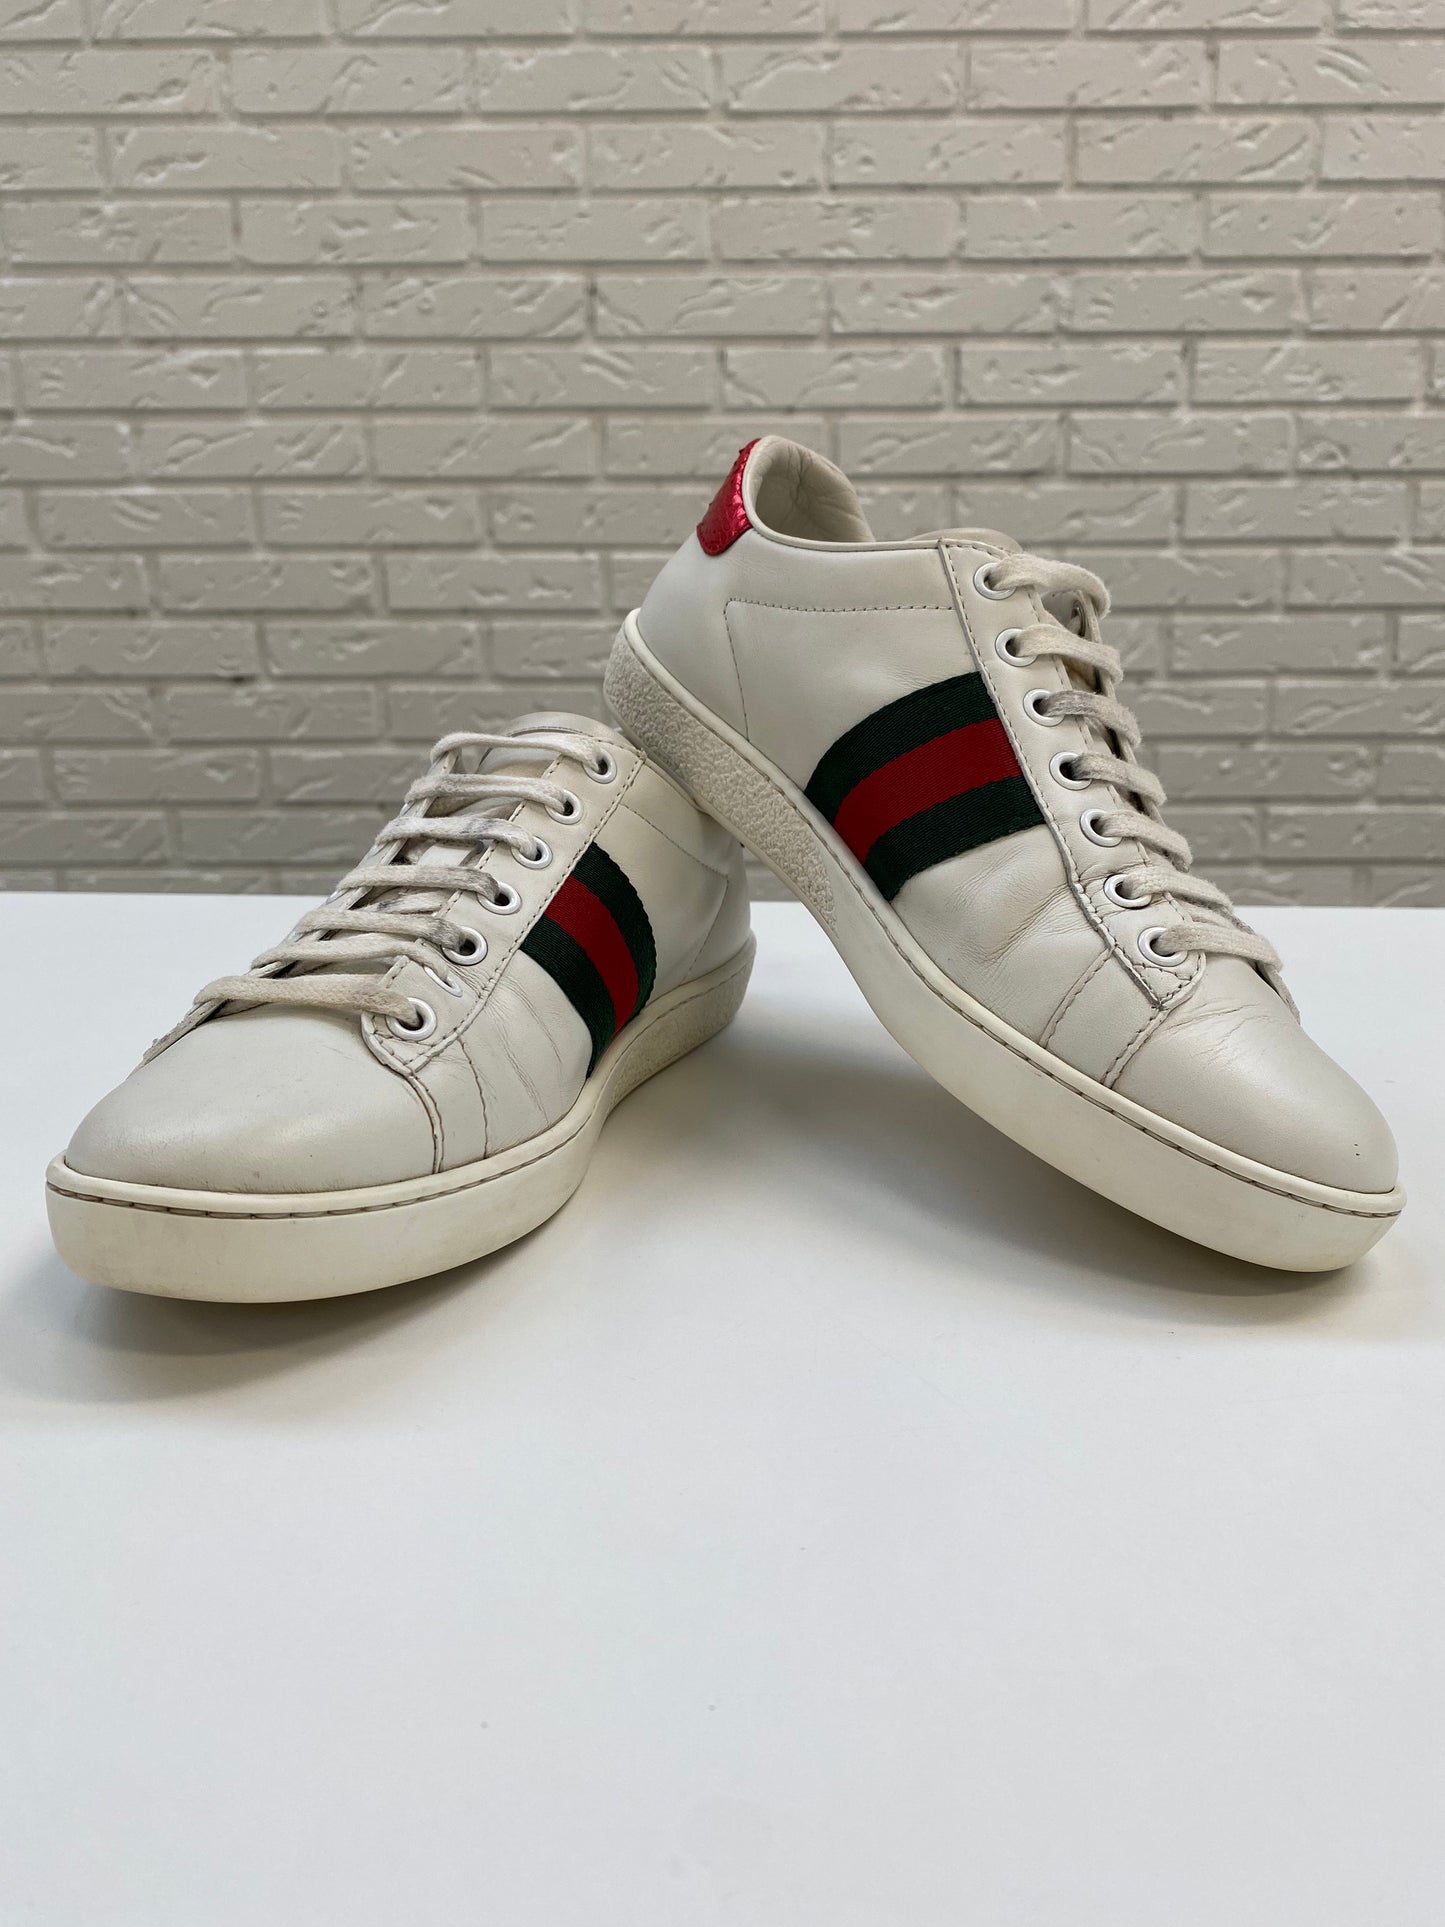 Gucci Ace “Bee” (36)